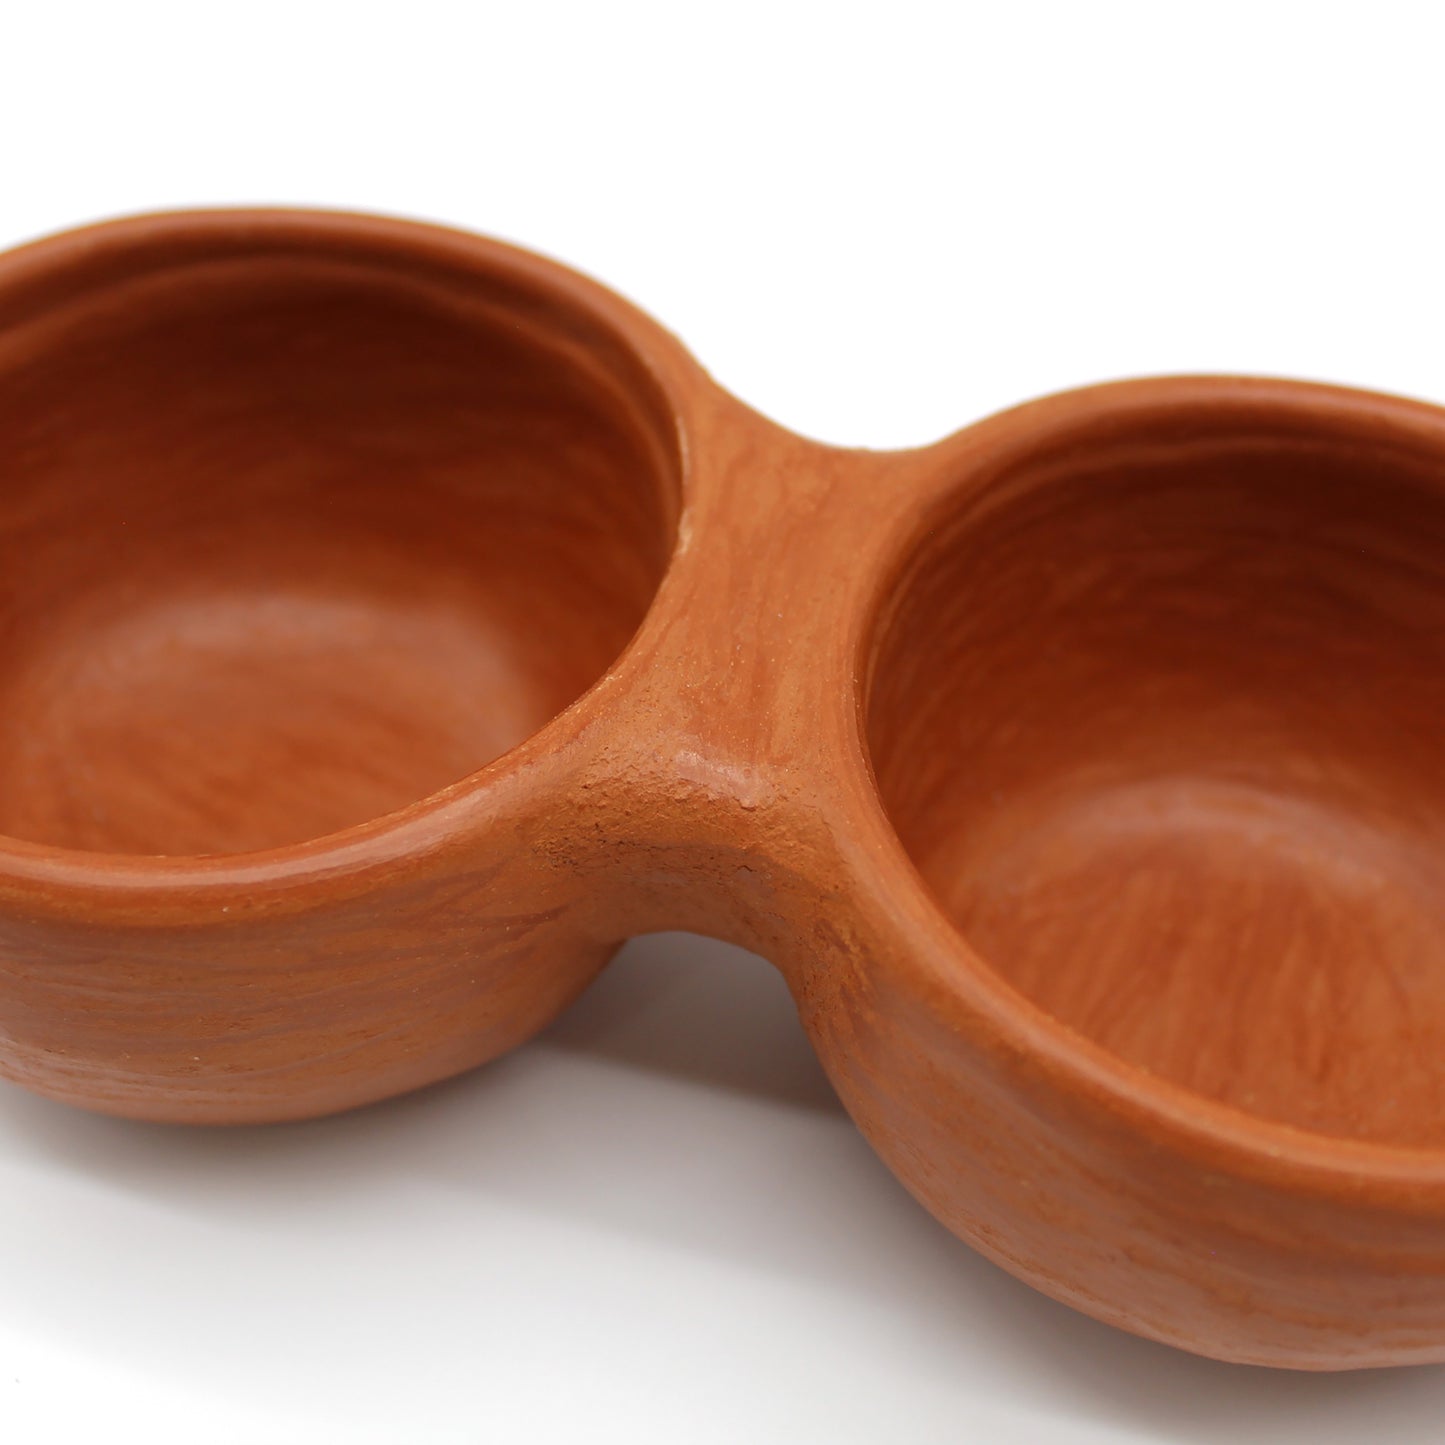 Terracotta Salsa Bowl 3 in one - set of 2